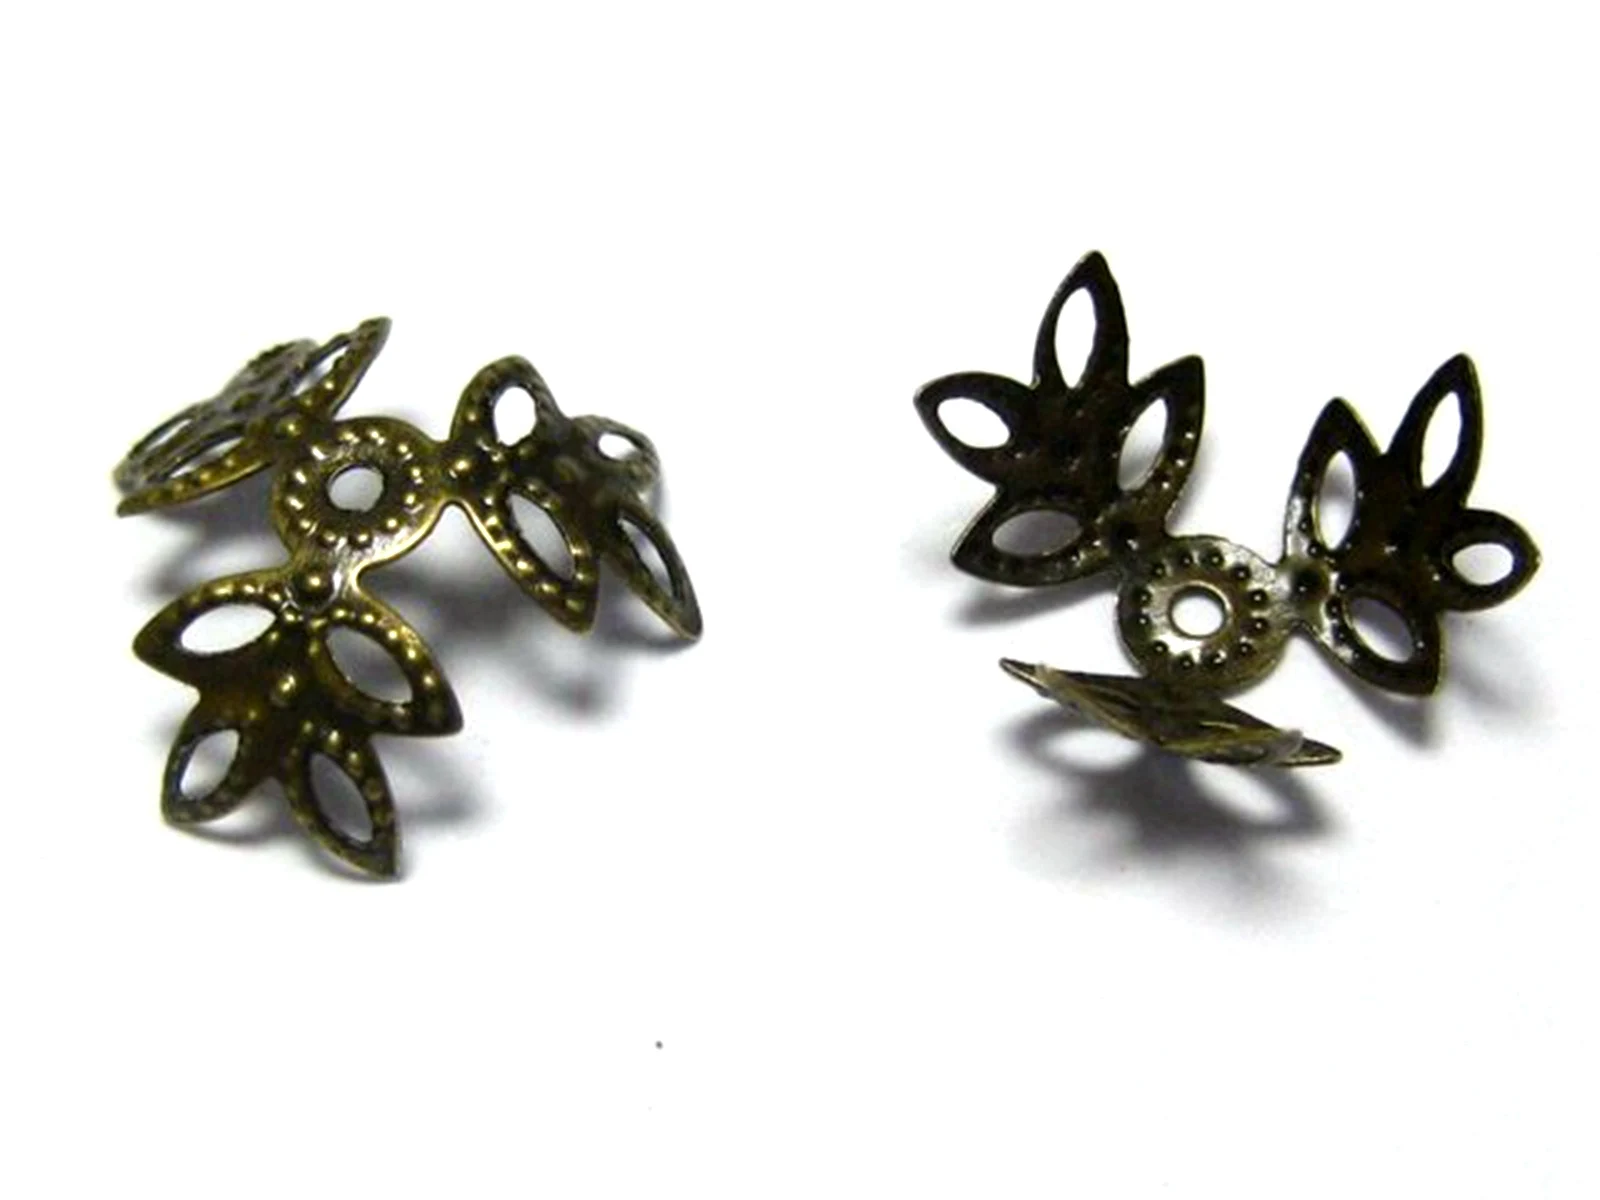 200pcs Silver-Gold-Gunblack 3-Petals Flower Jewelry Beads Caps 14mm Fit 12mm-18mm Beads images - 6